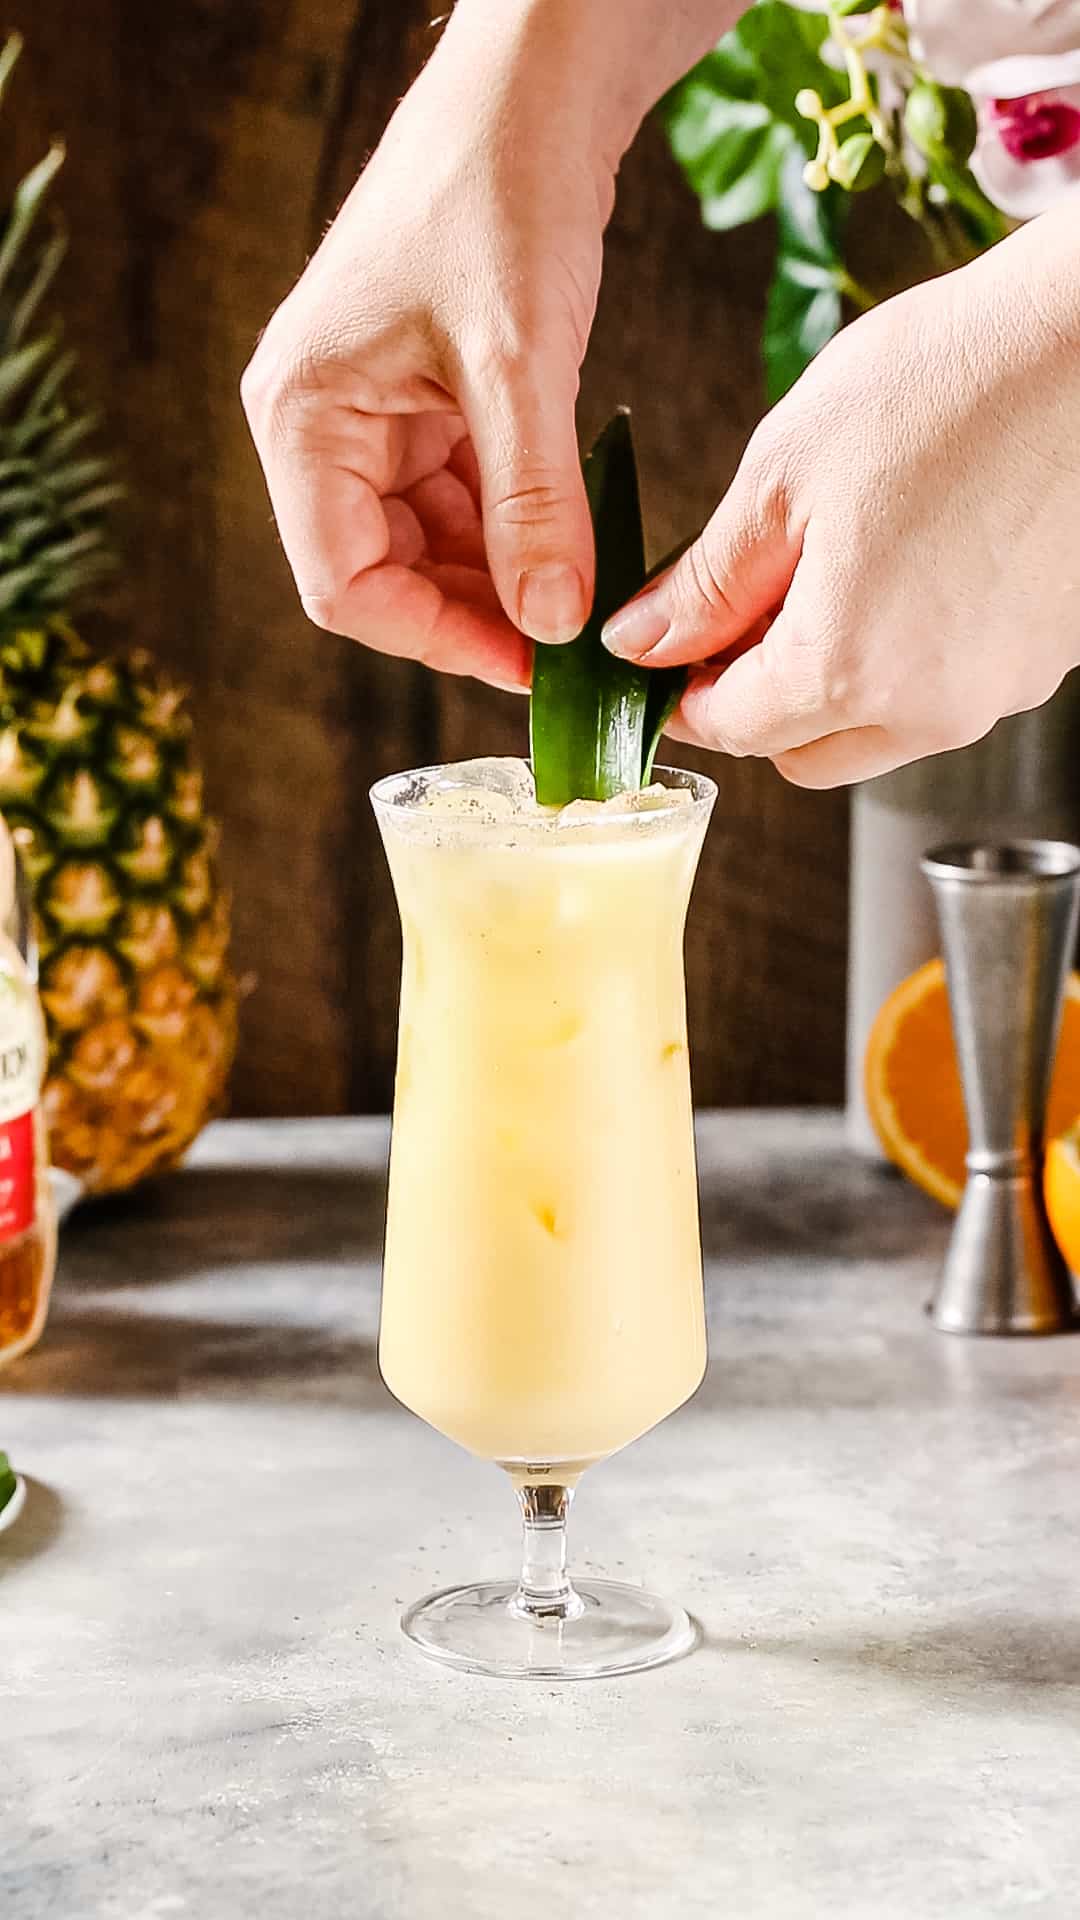 Hands adding pineapple fronds to the cocktail as a garnish.